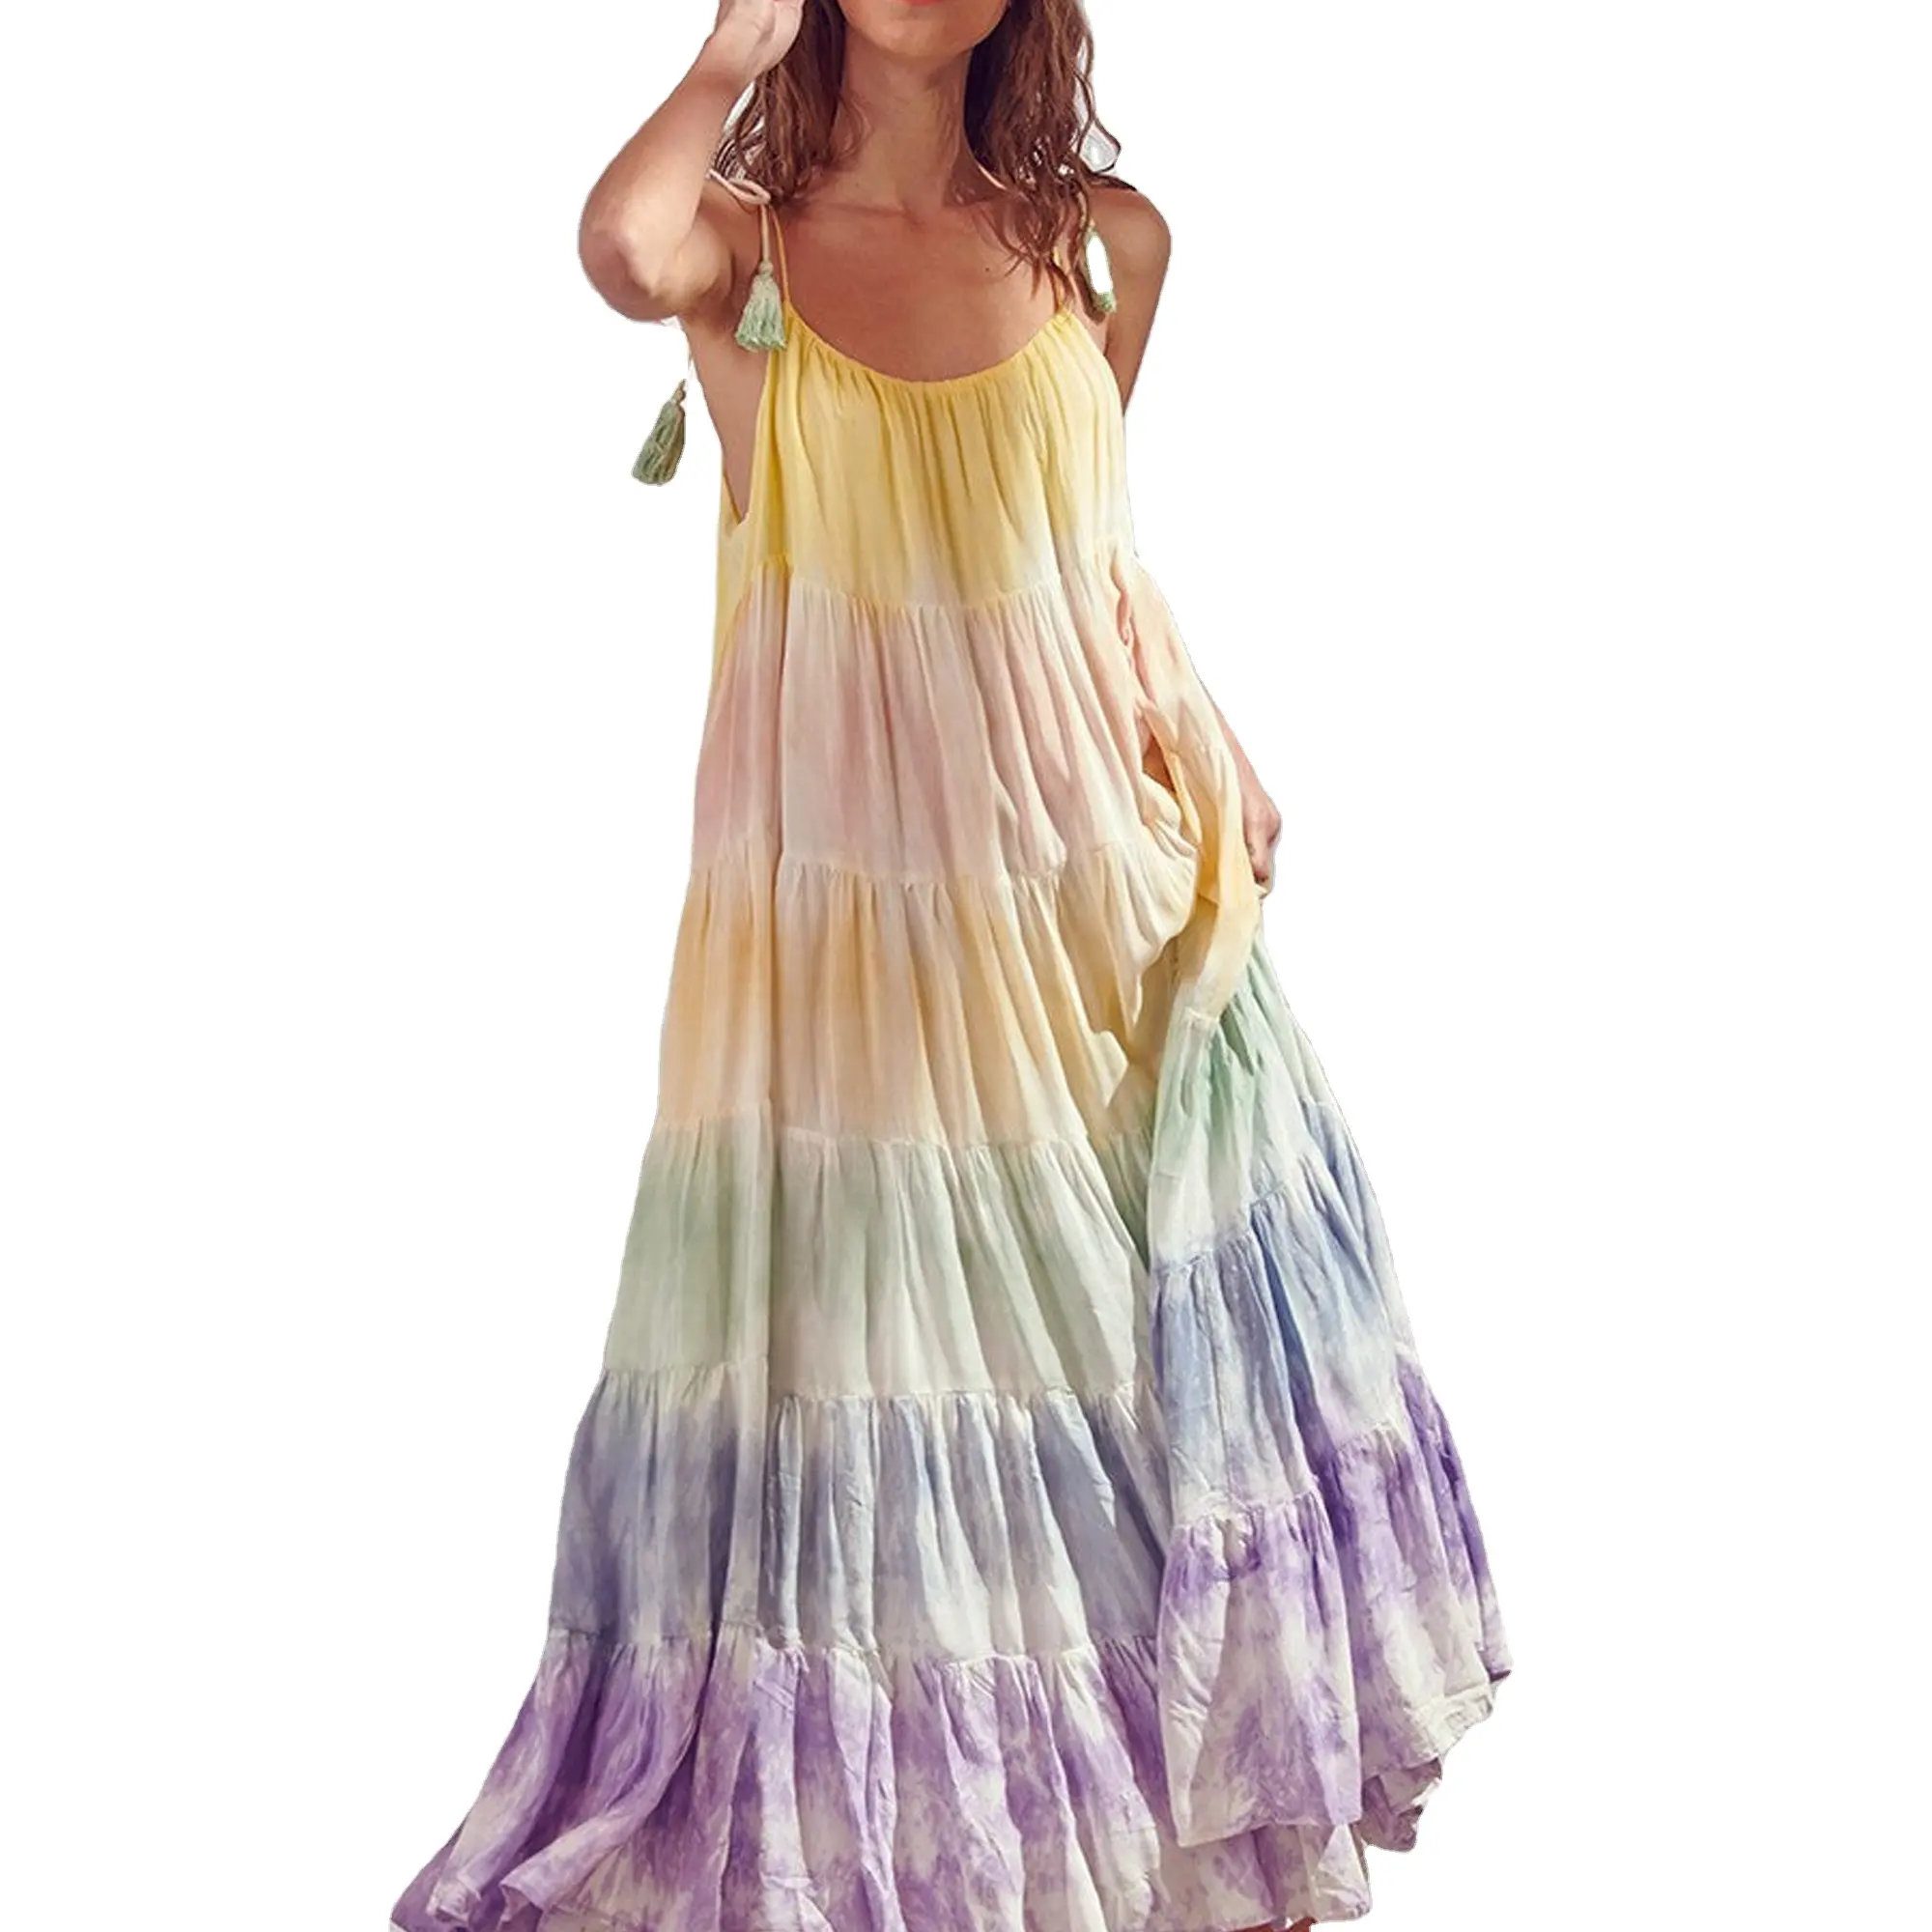 Elegant Designer Multi Color Tie Dye Rayon Women Sexy Backless Ankle Length Tiered Bohemian Marriage Party Maxi Dress